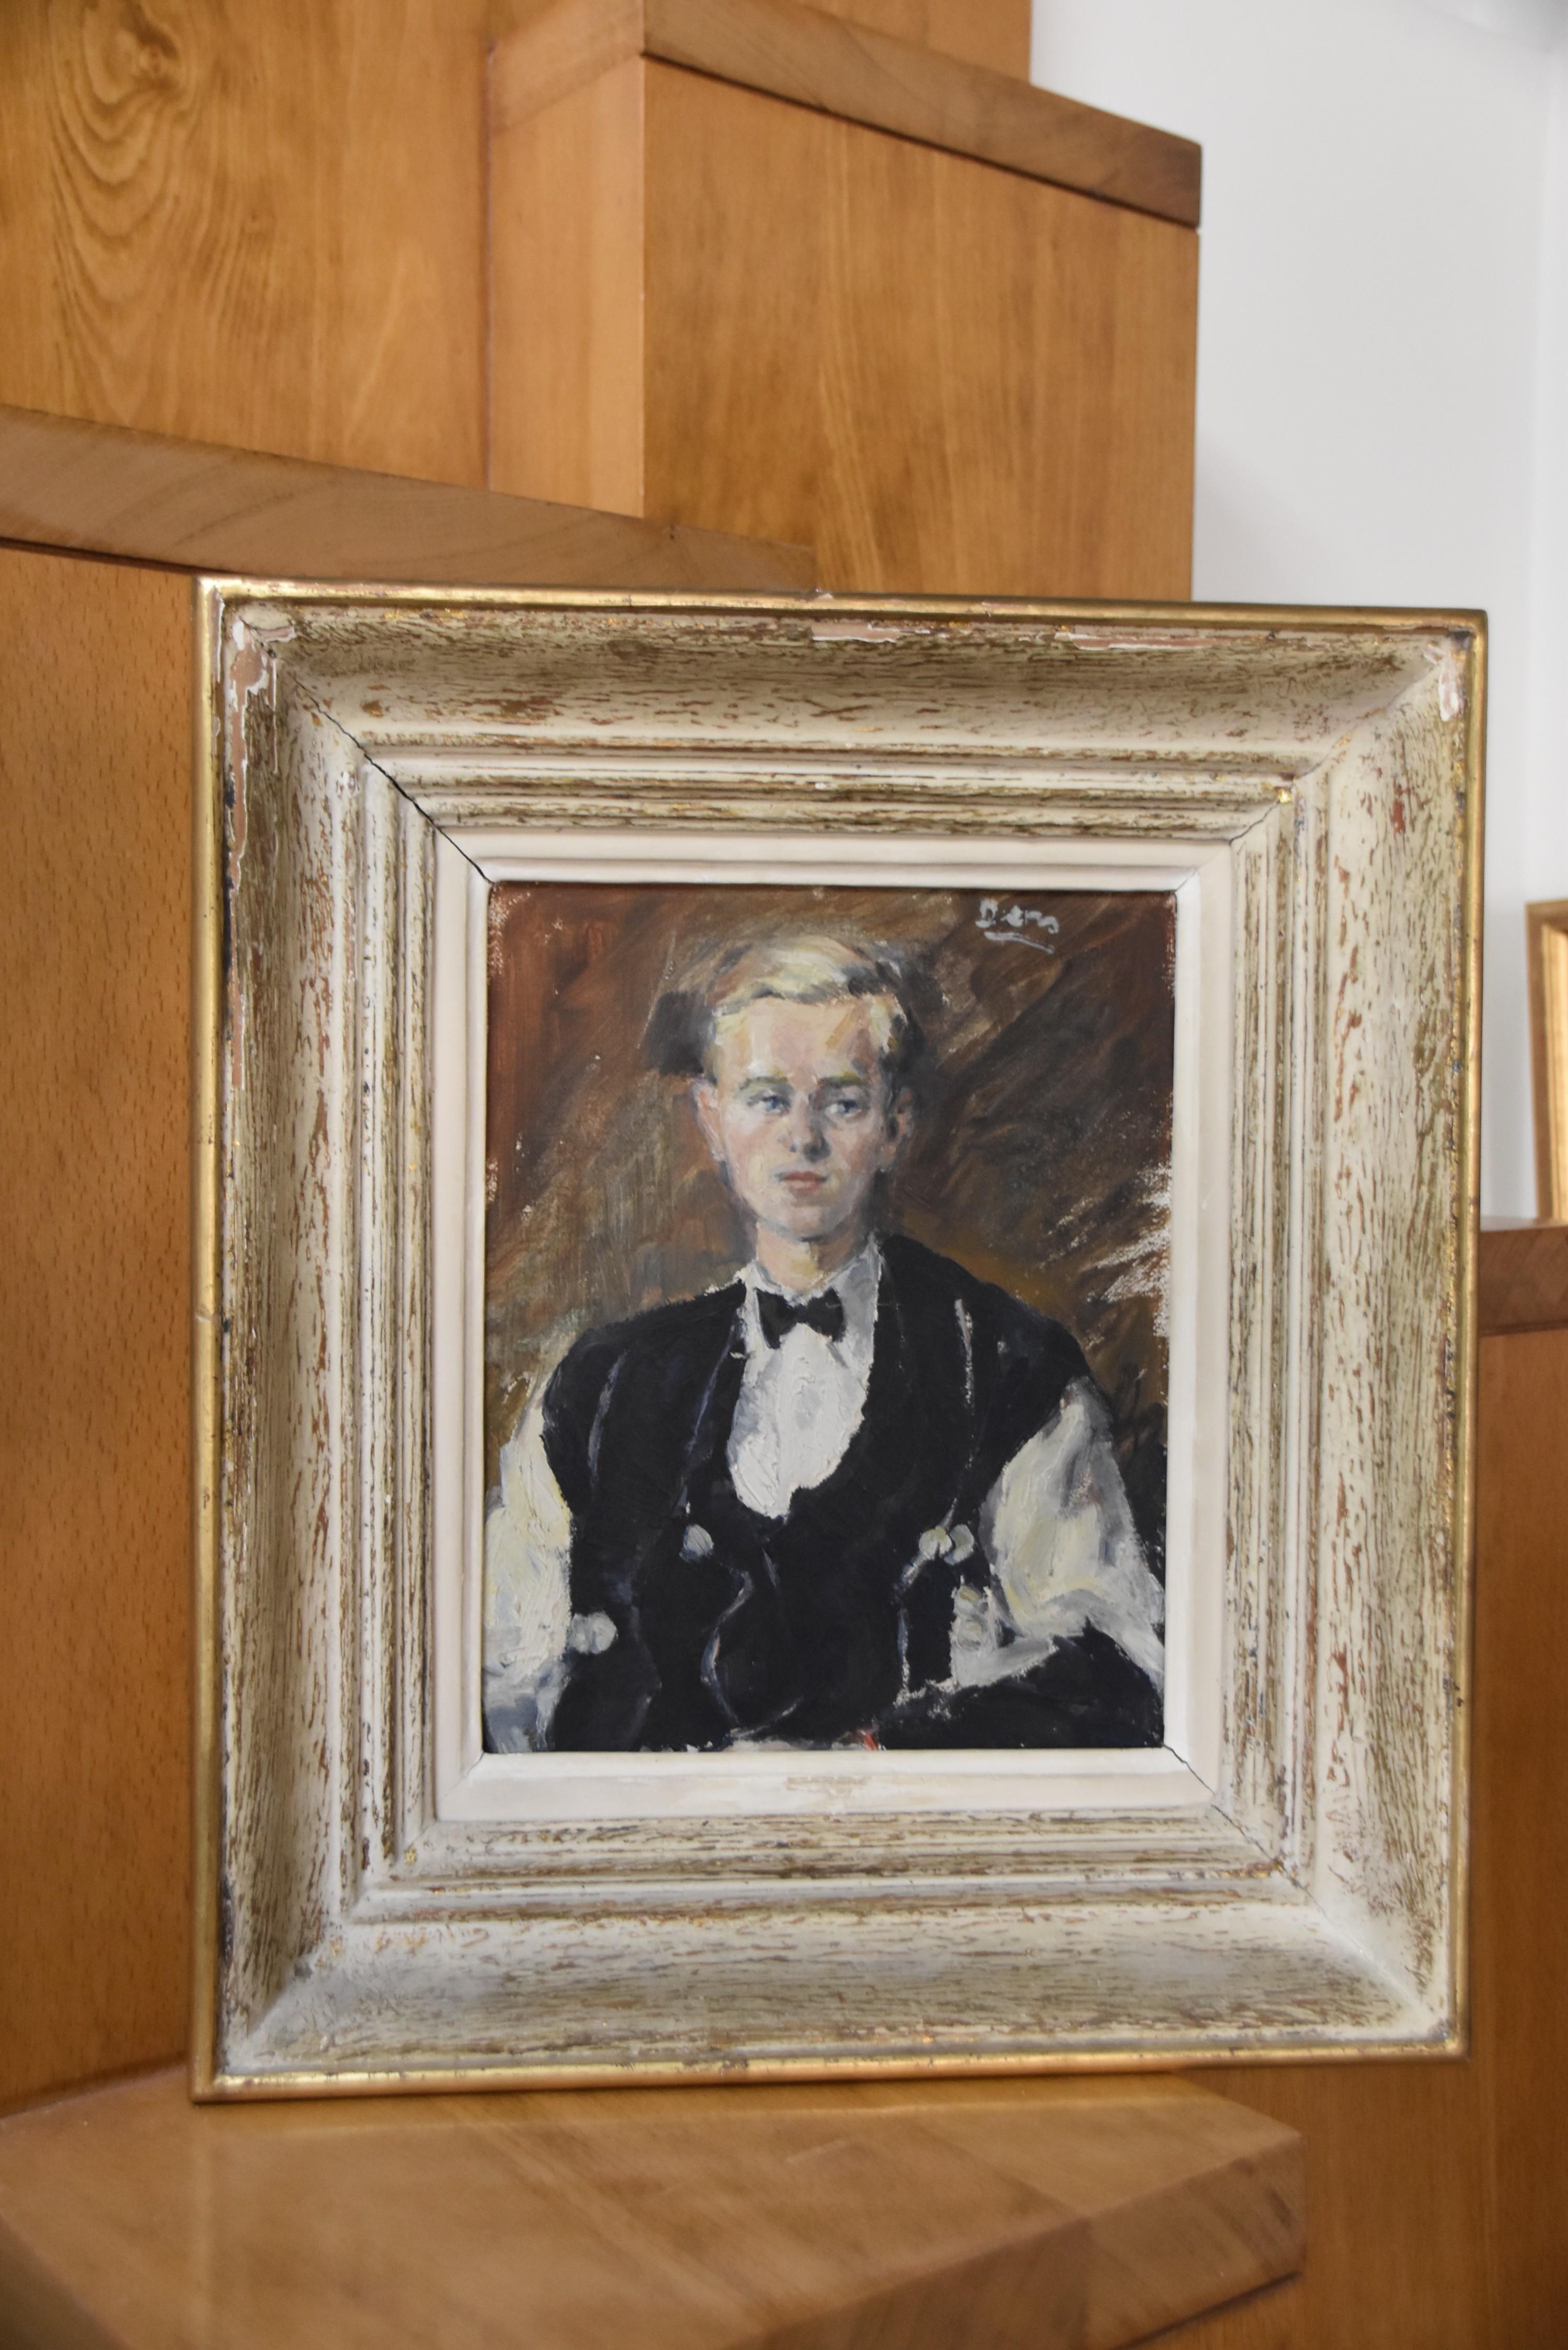 French school circa 1930
Portrait of a young man
Oil on cardboard panel
27 x 21.5 cm
Bears a signature (illegible) upper right
In its original frame : 42 x 36 cm, some damages to the frame (see  photographs please)